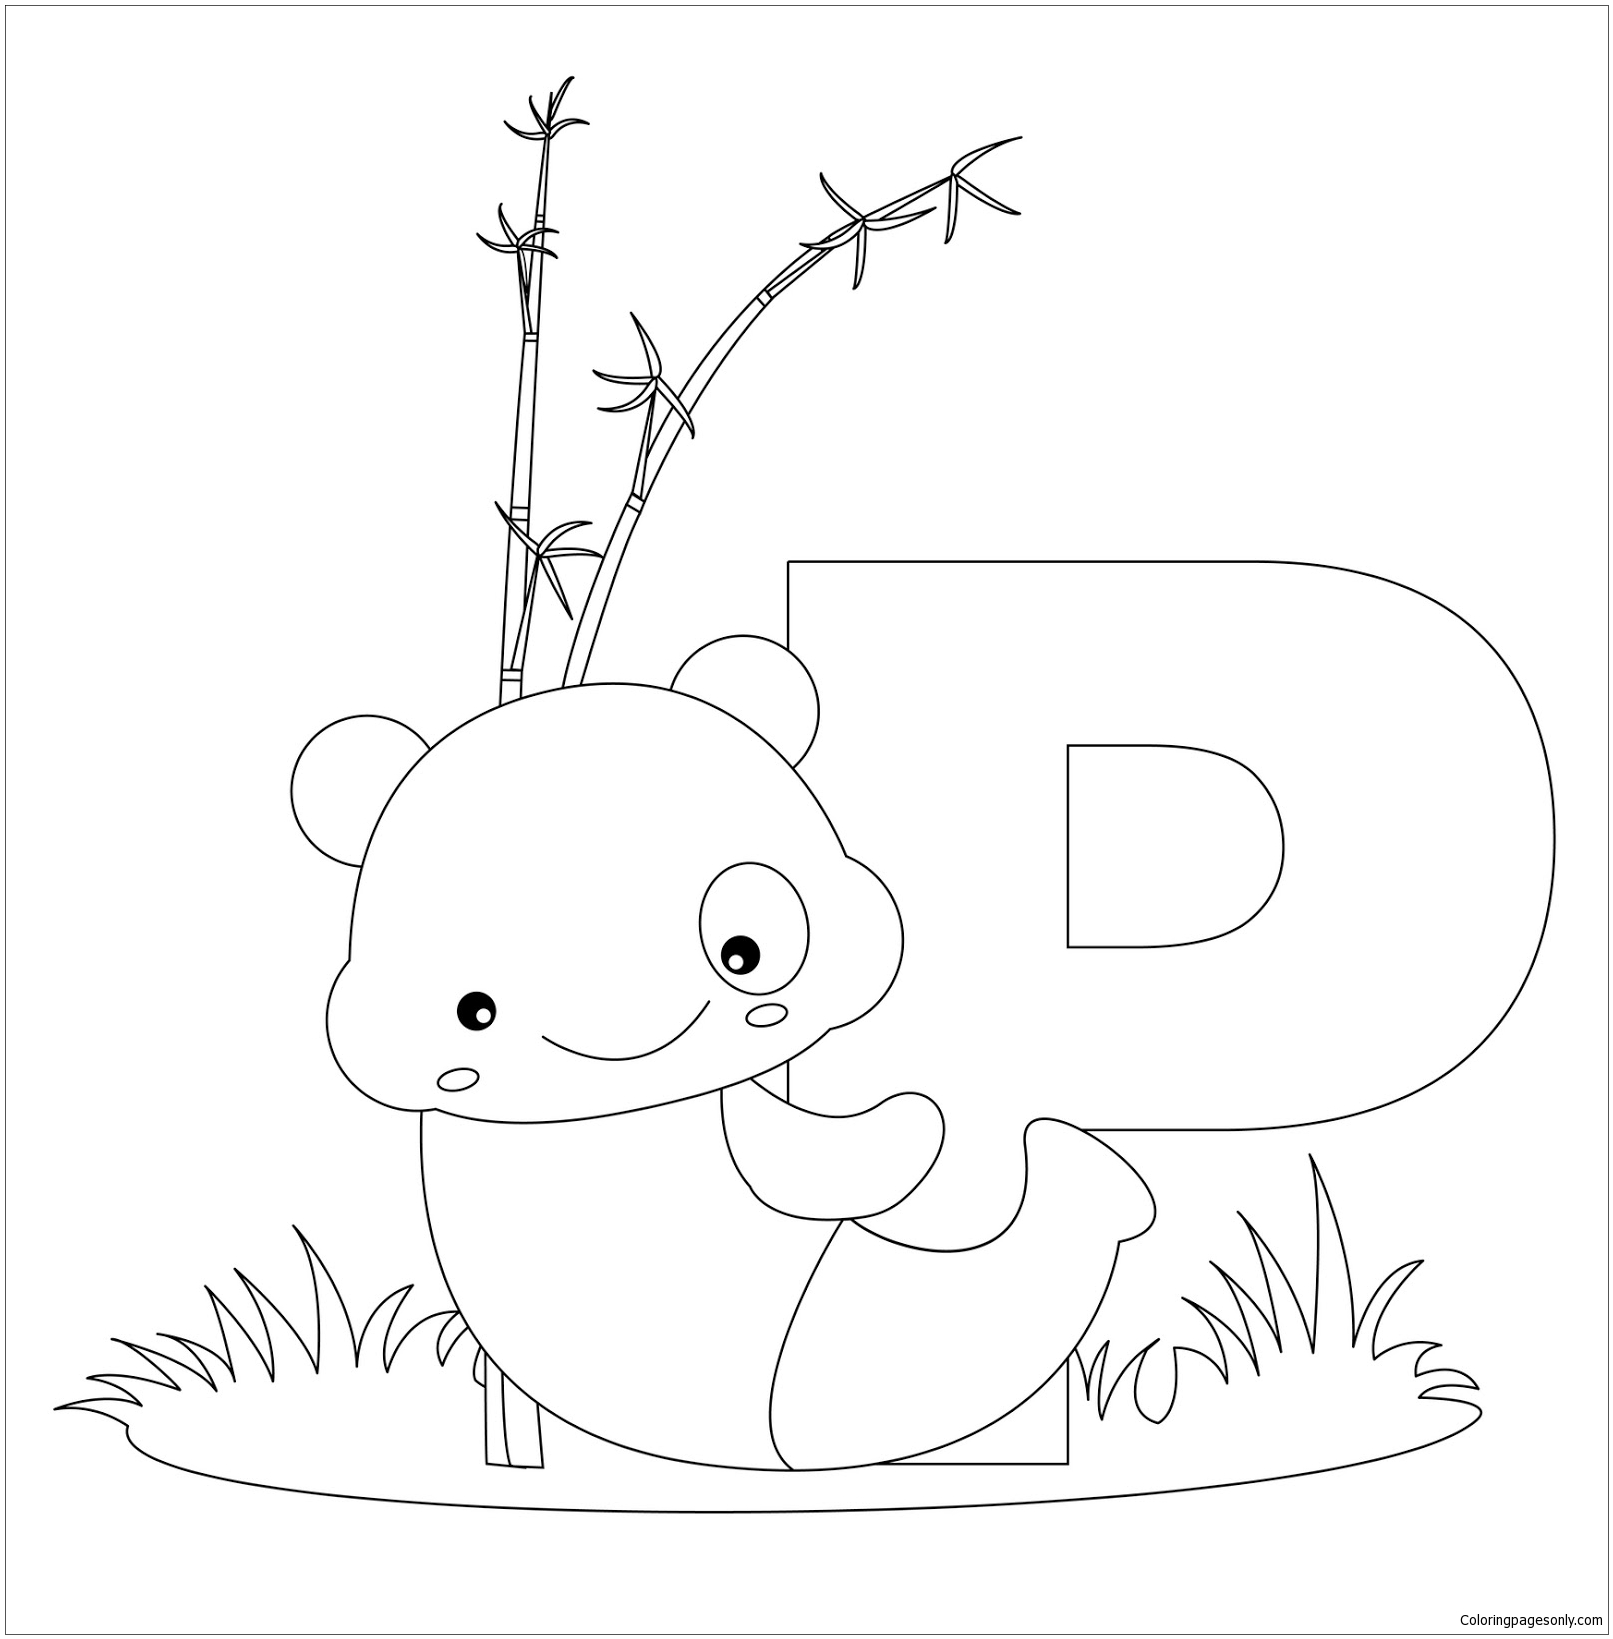 807 Cartoon Animal Alphabet Coloring Pages with Animal character